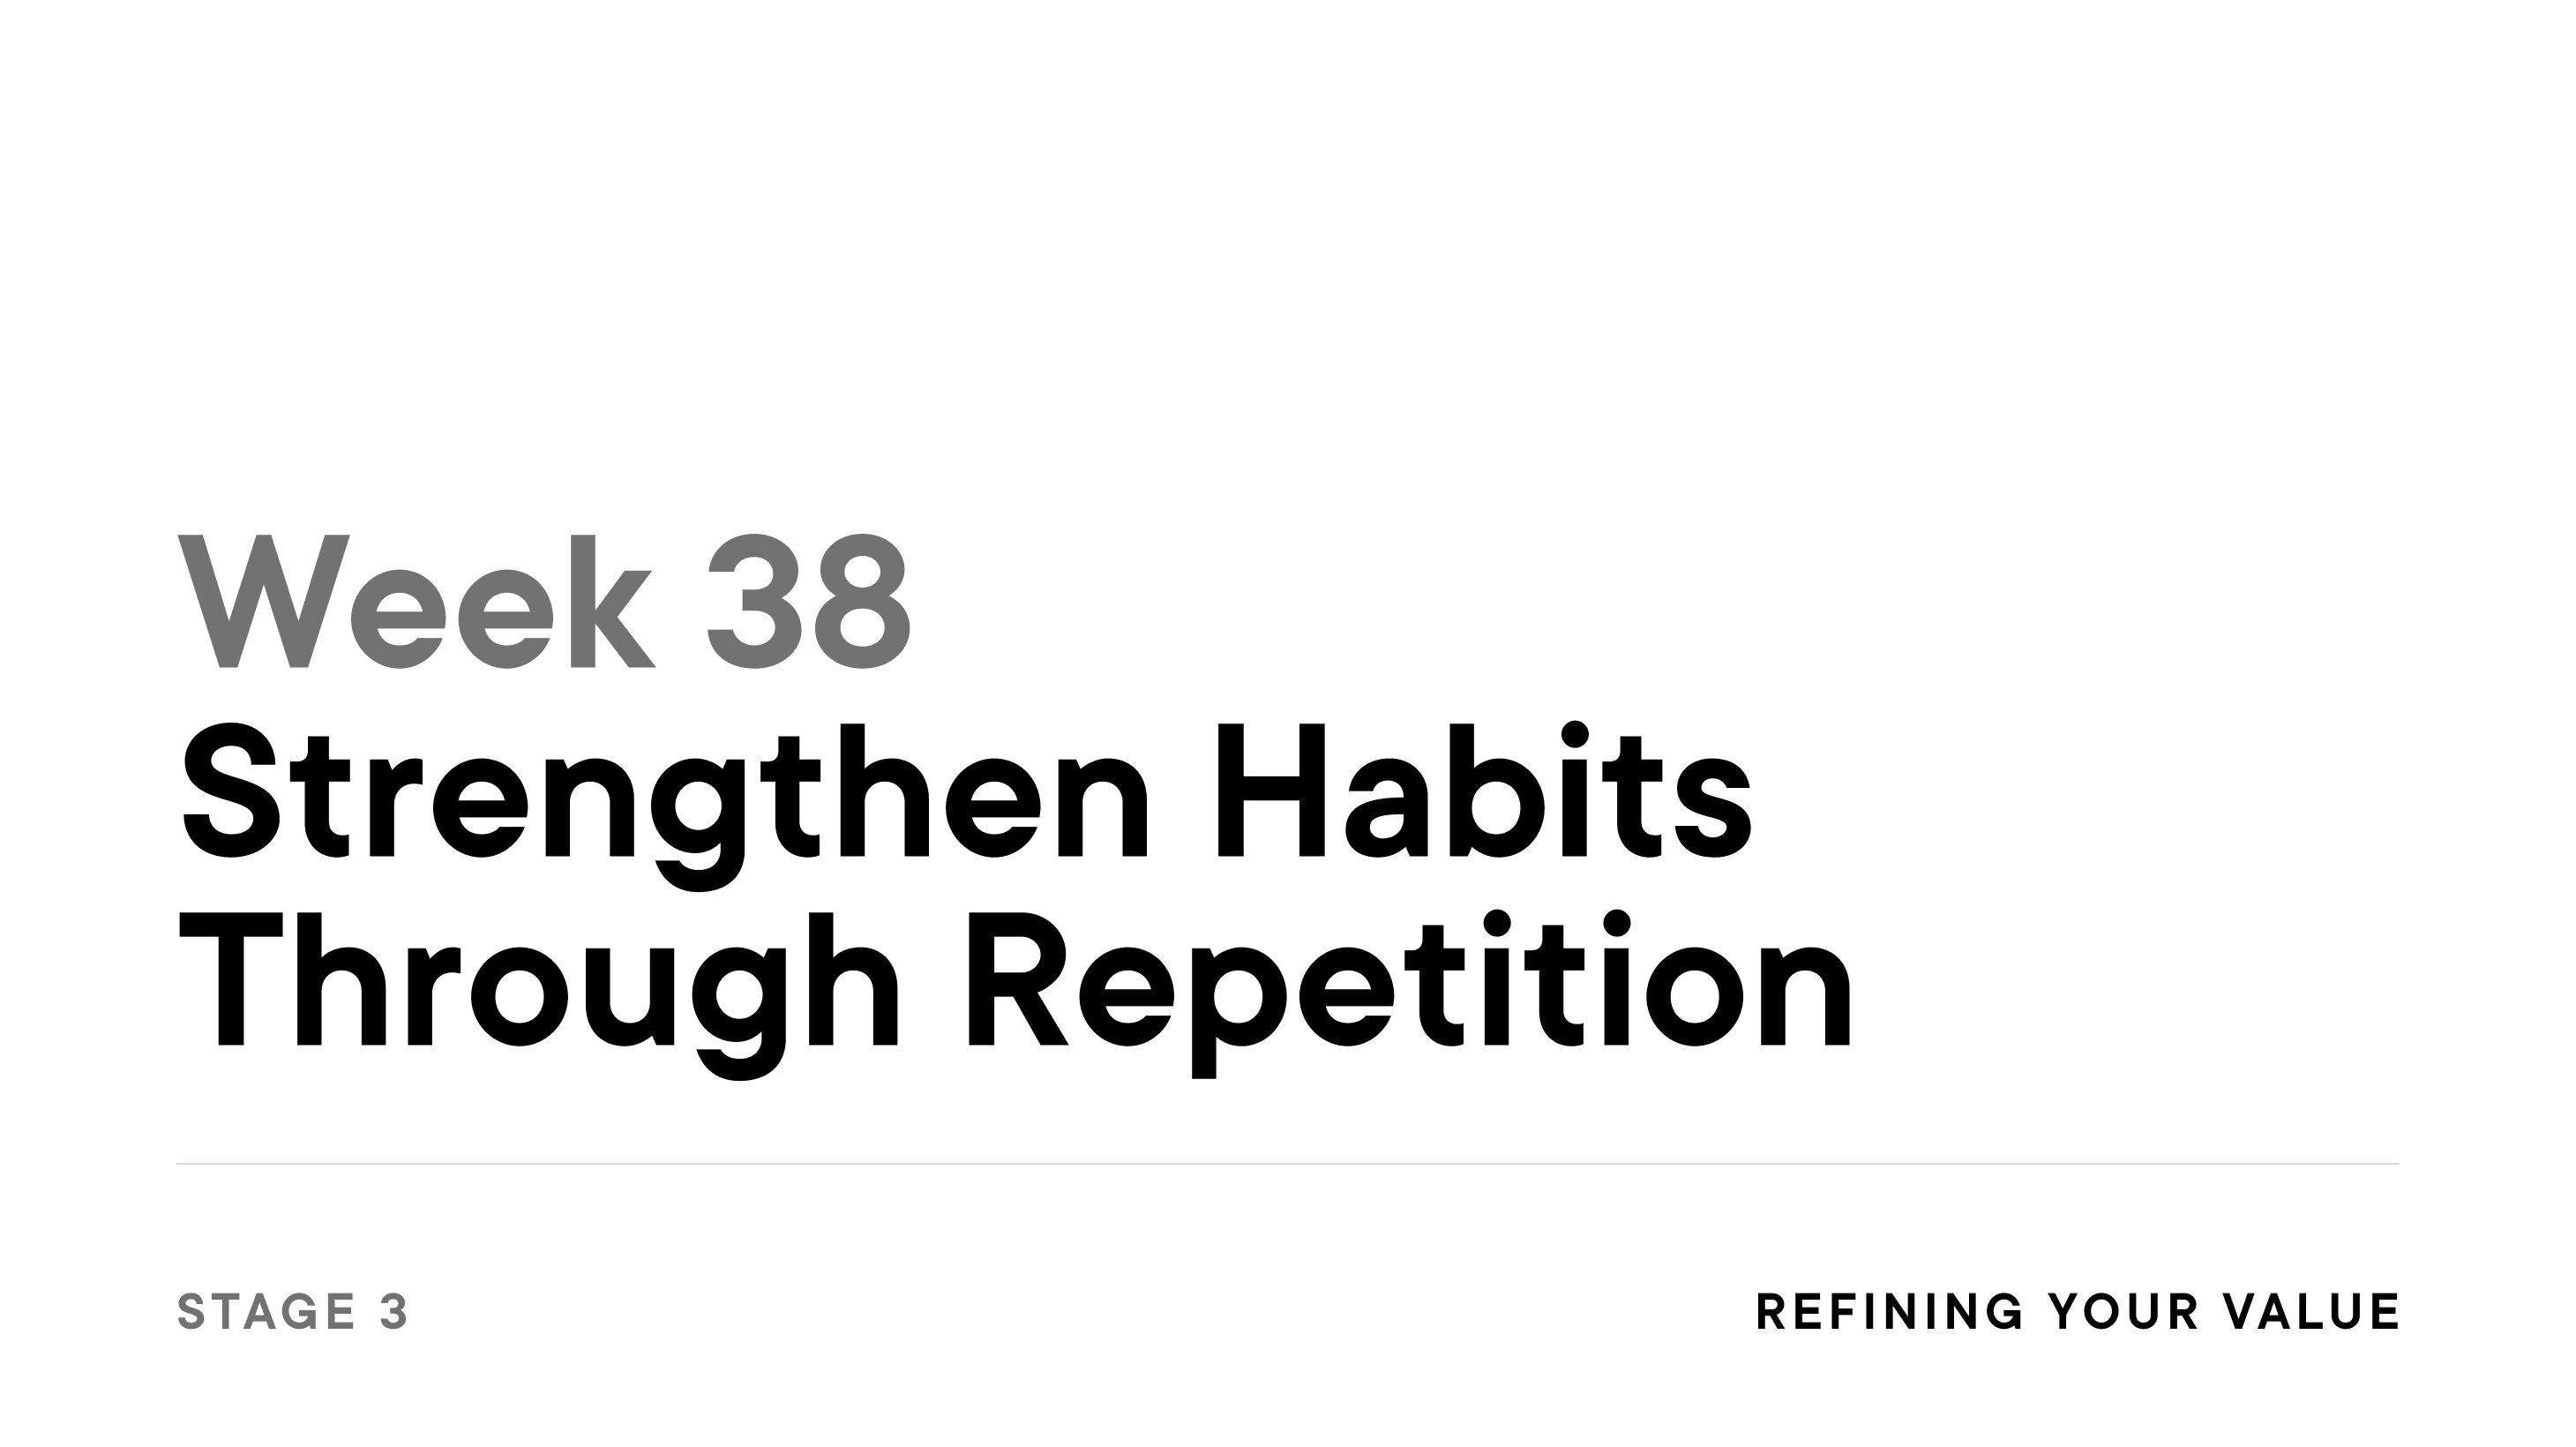 Week 38: Strengthen Habits Through Repetition